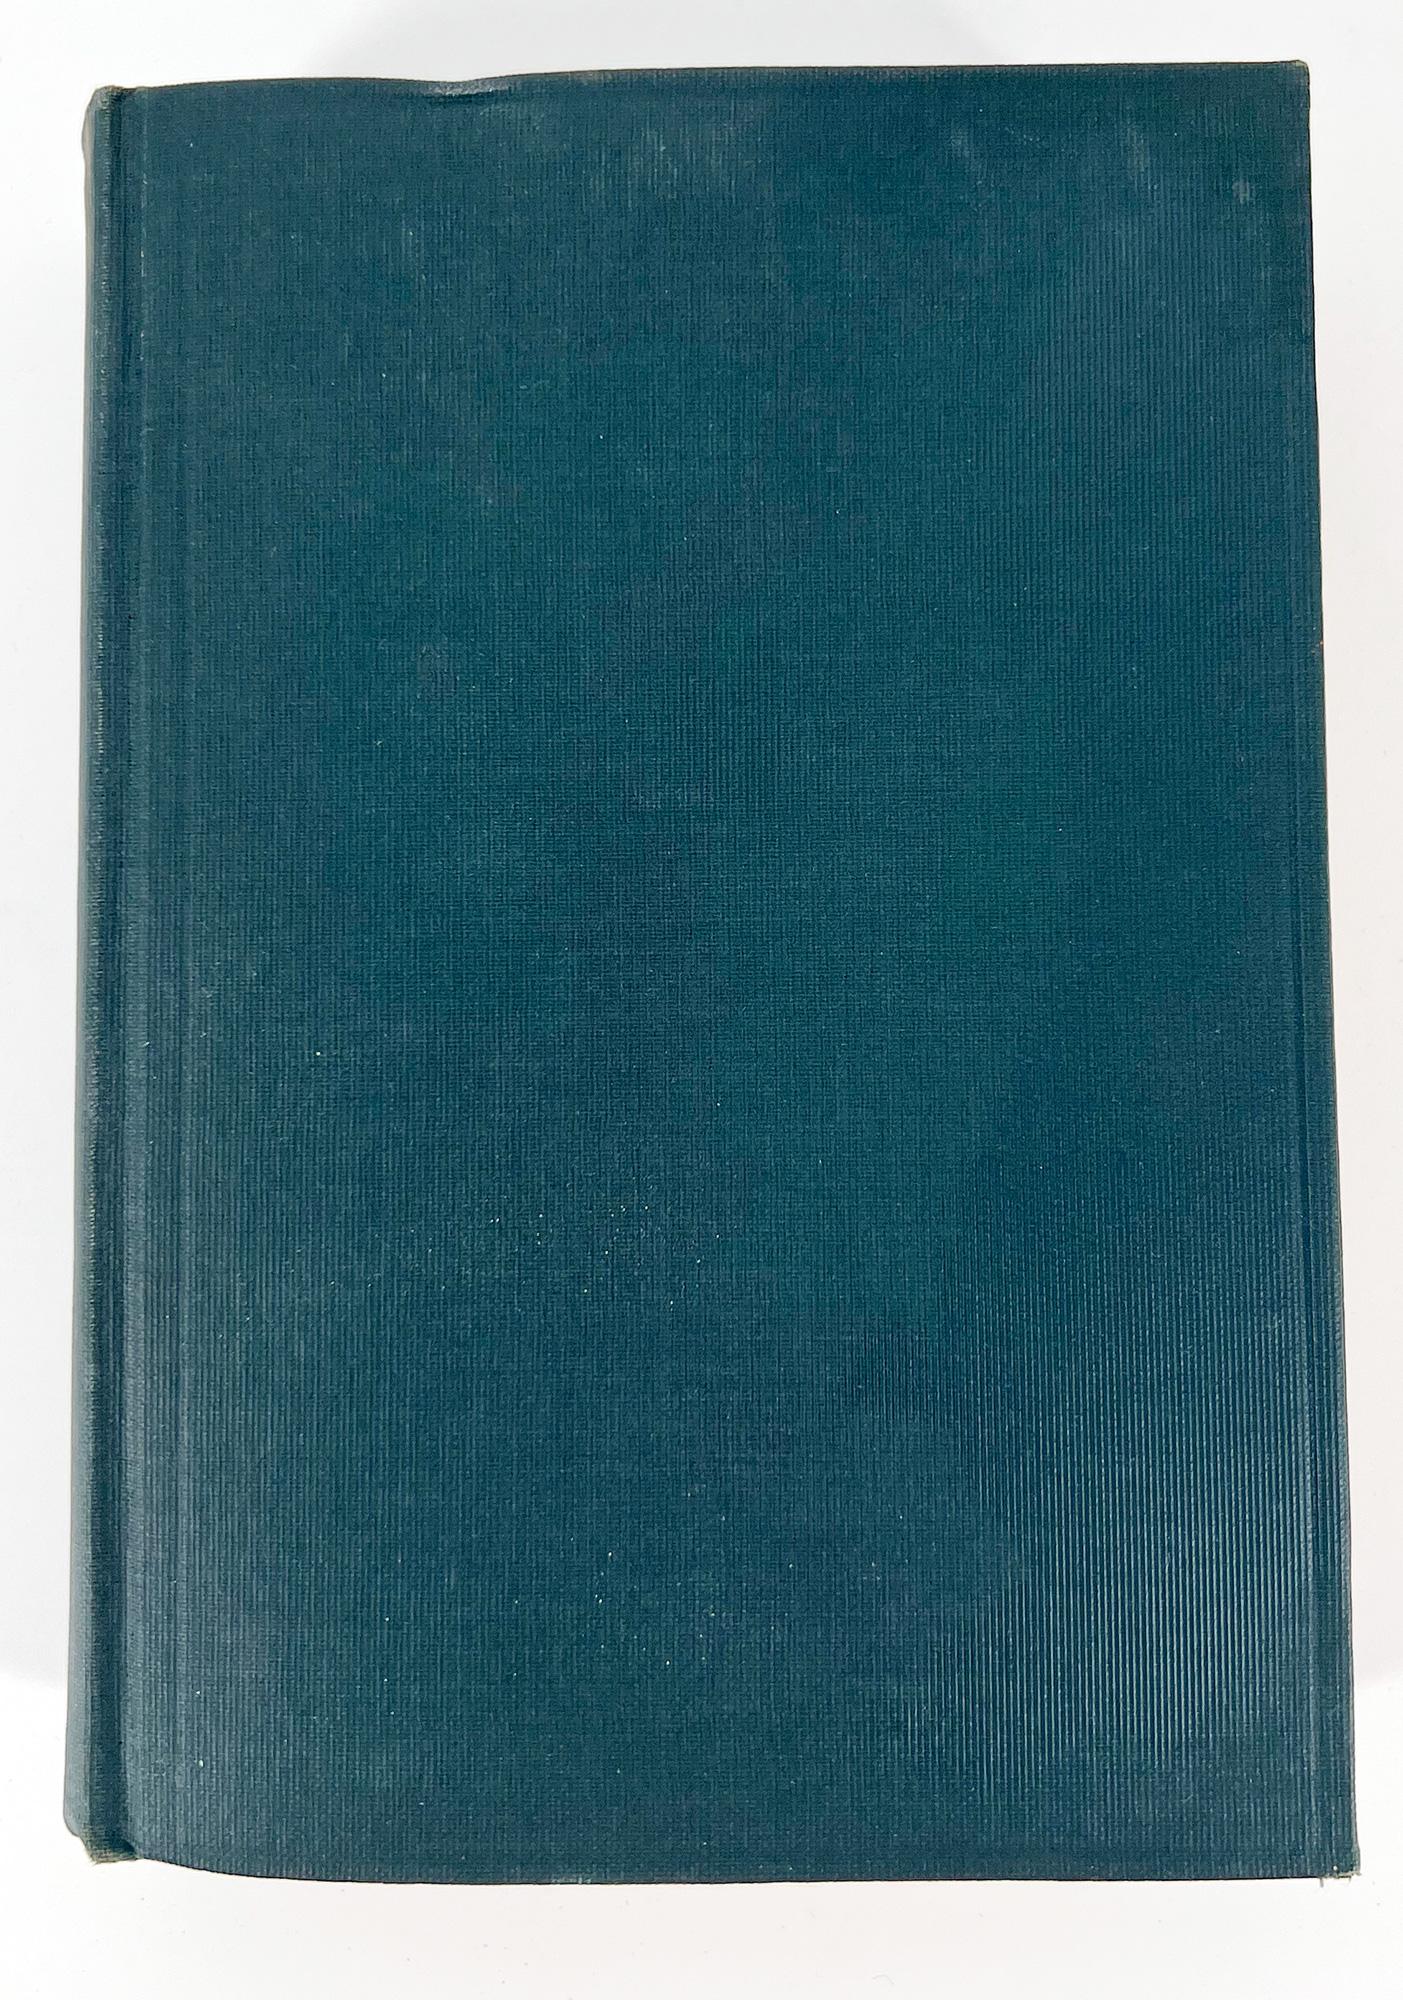 Tender is the Night by F. Scott Fitzgerald - FIRST EDITION, FIRST PRINTING For Sale 3